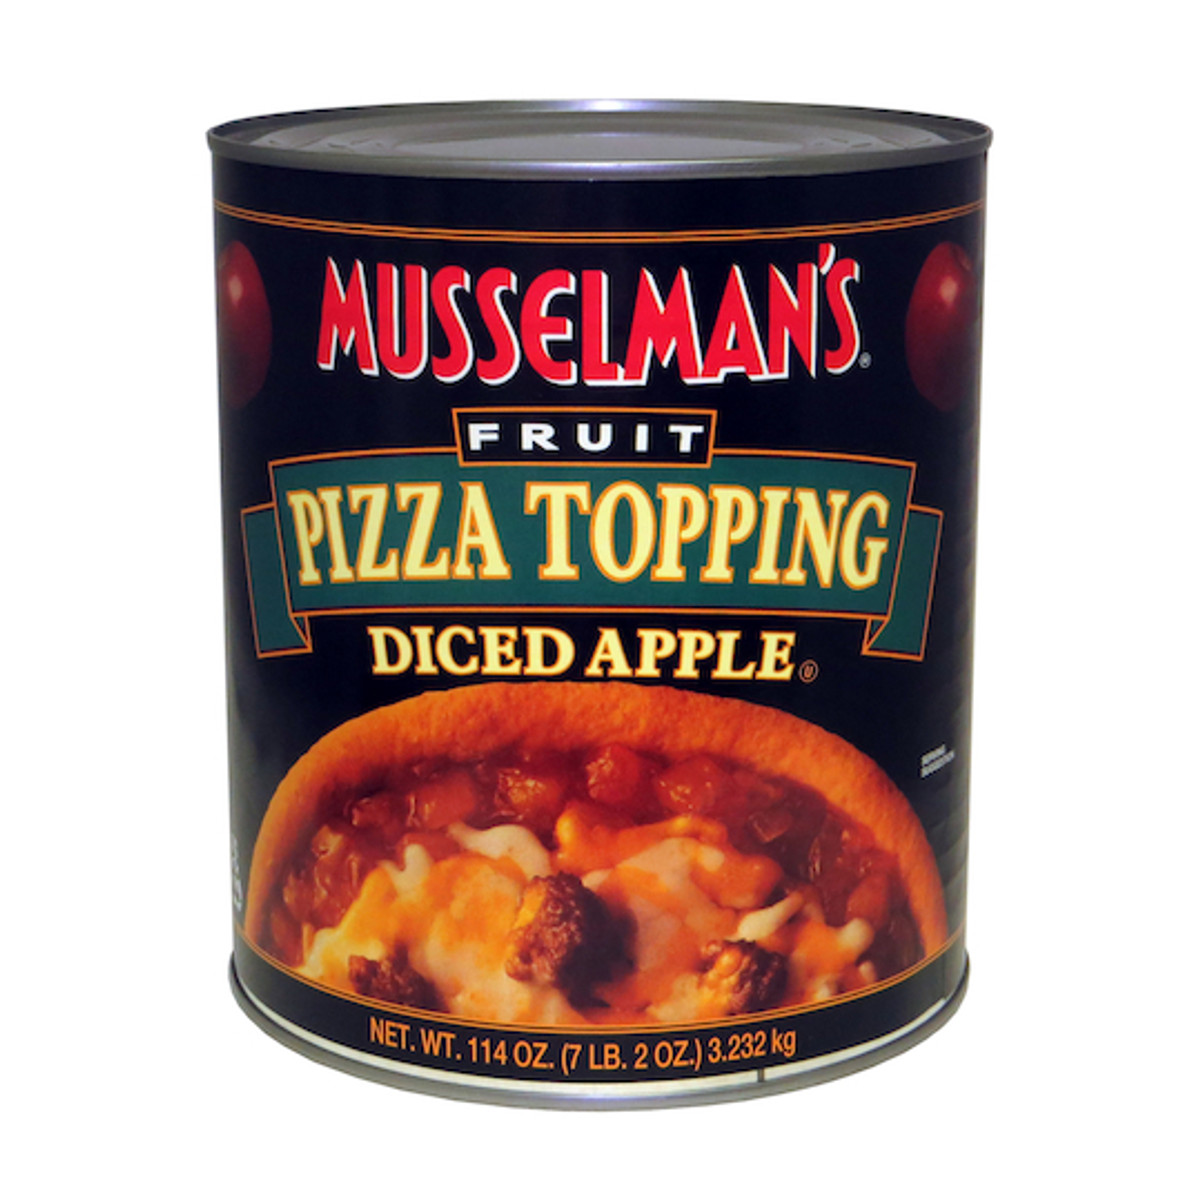 Musselman s Fruit Pizza Topping Diced Apple, 114 Ounces, 6 Per Case